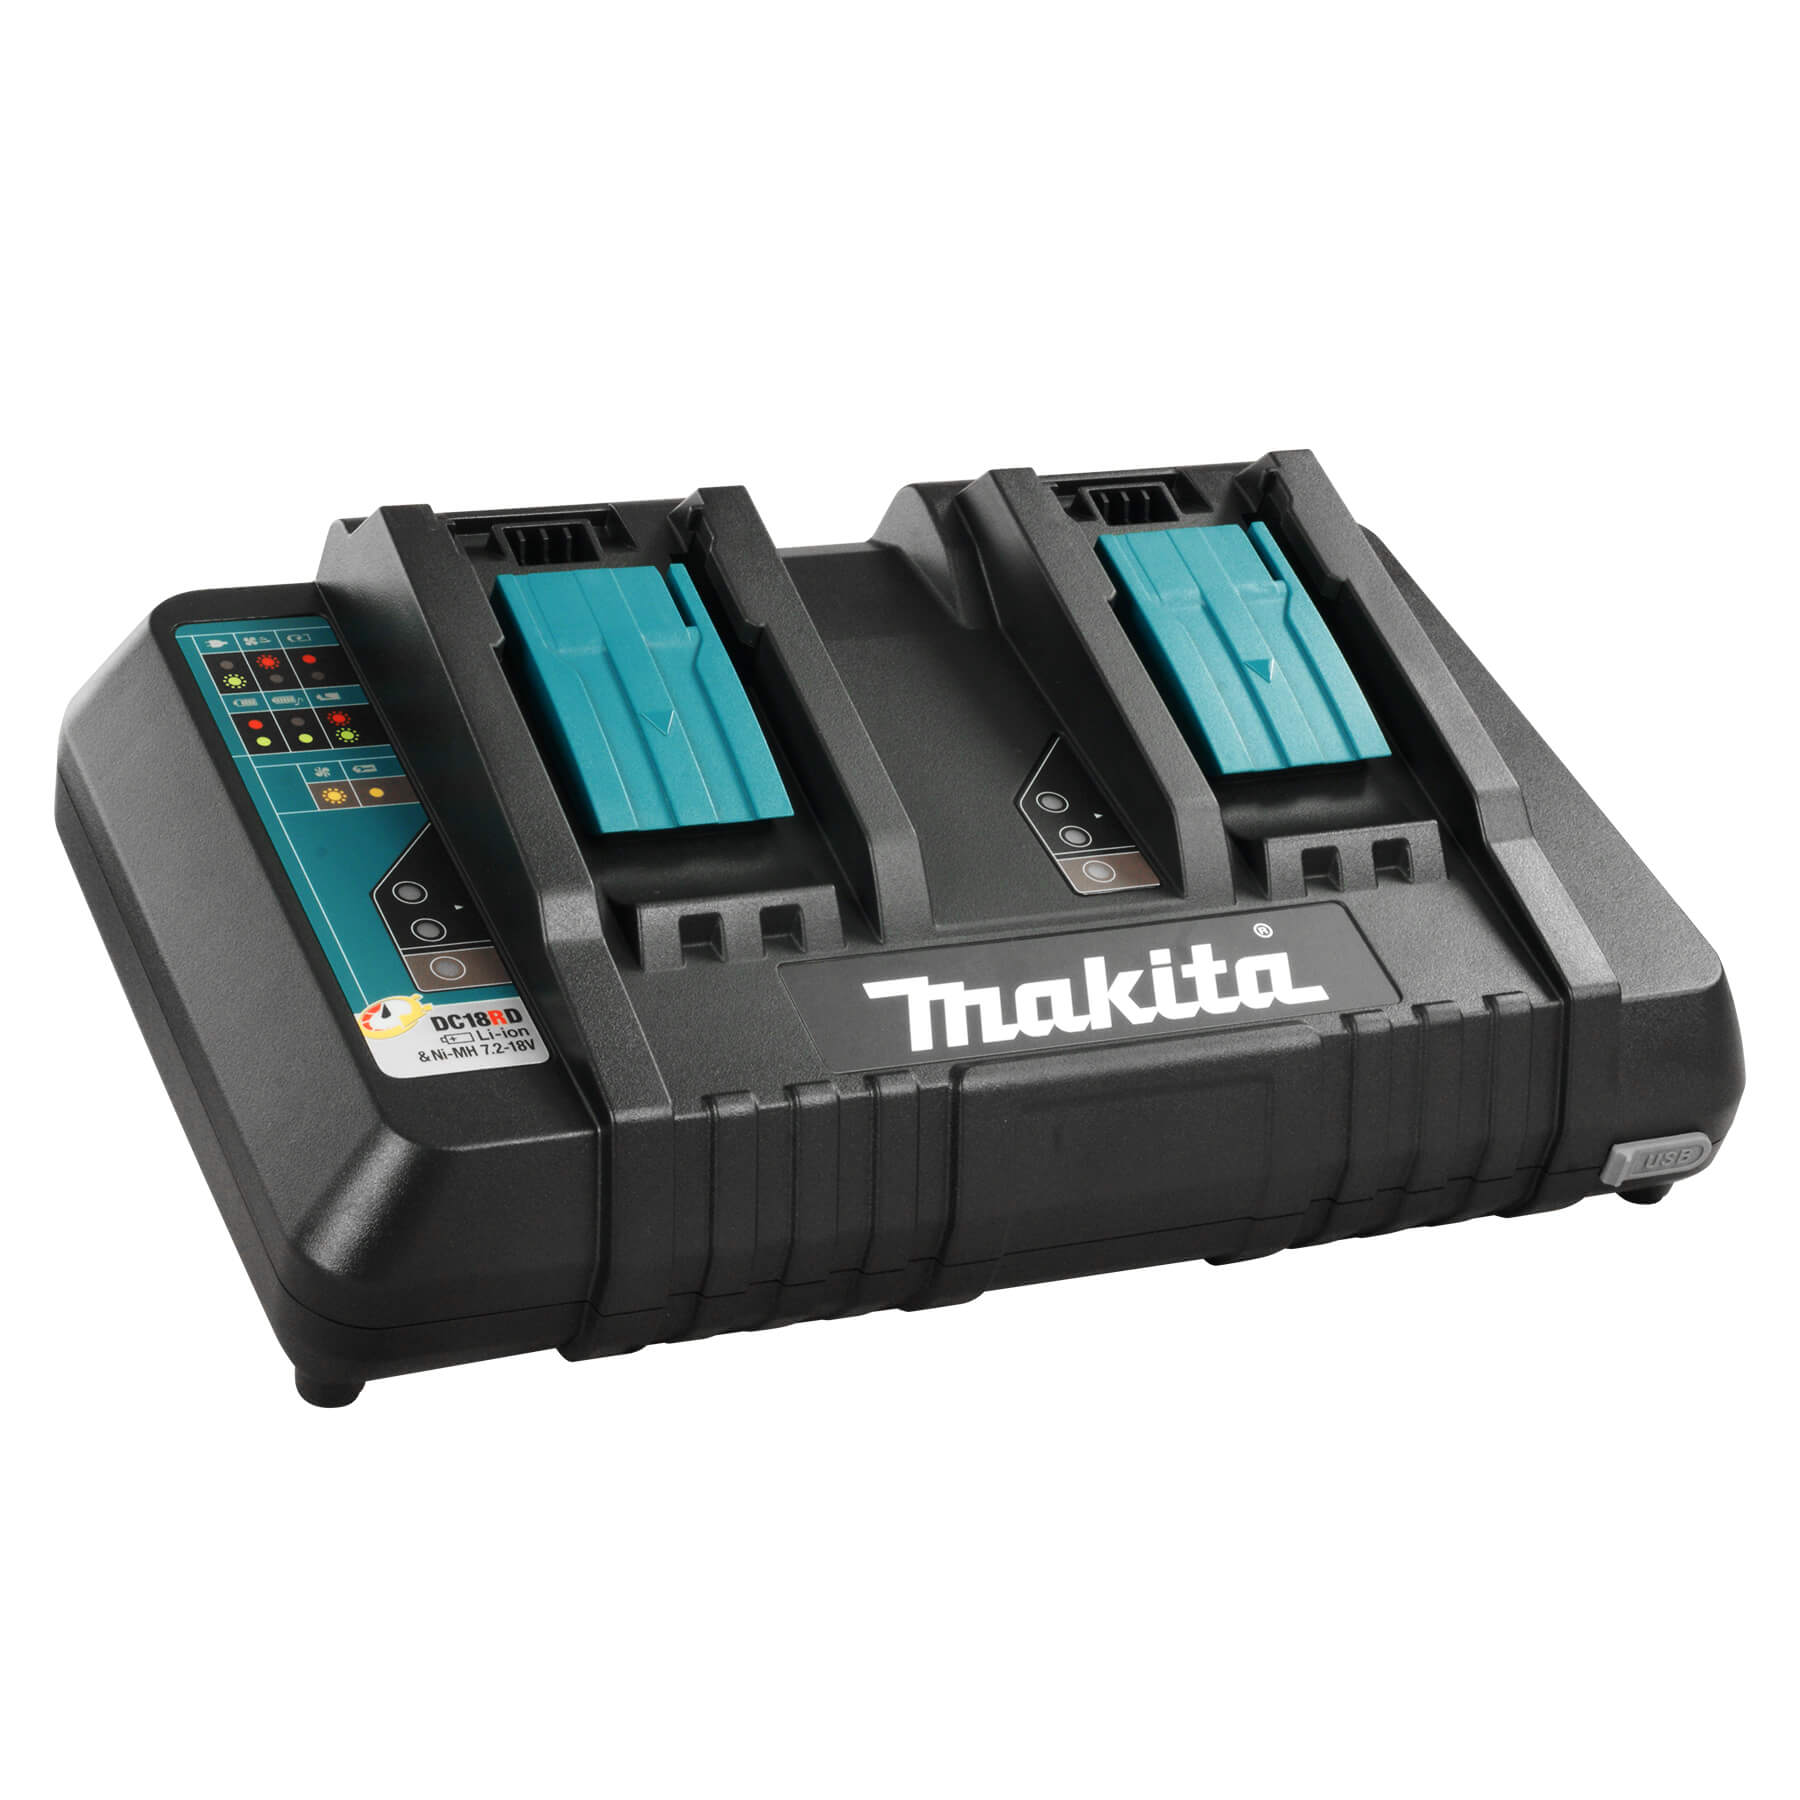 Makita DC18RD 18V Dual Port Rapid Charger - wise-line-tools